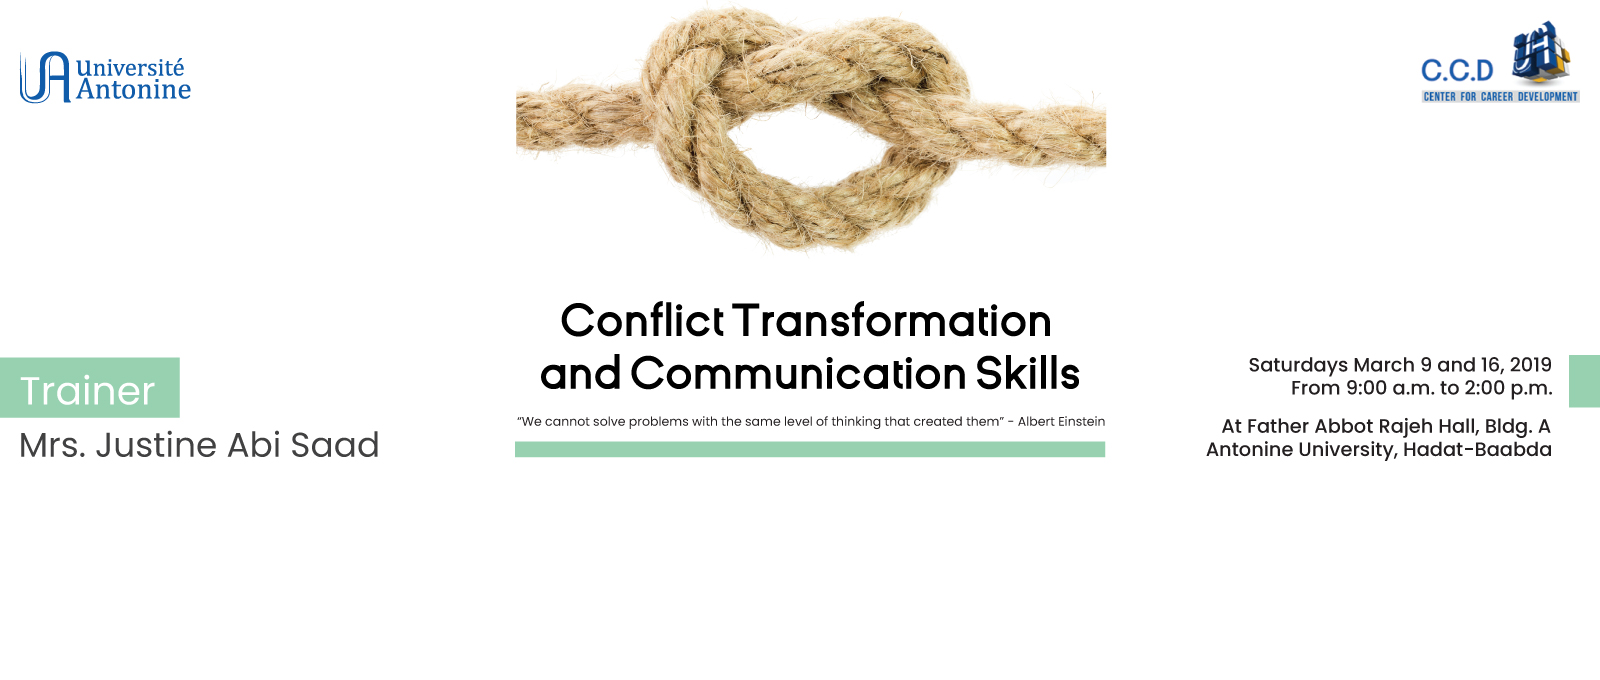 Training session entitled "Conflict Transformation and Communication Skills" organized by the C.C.D 